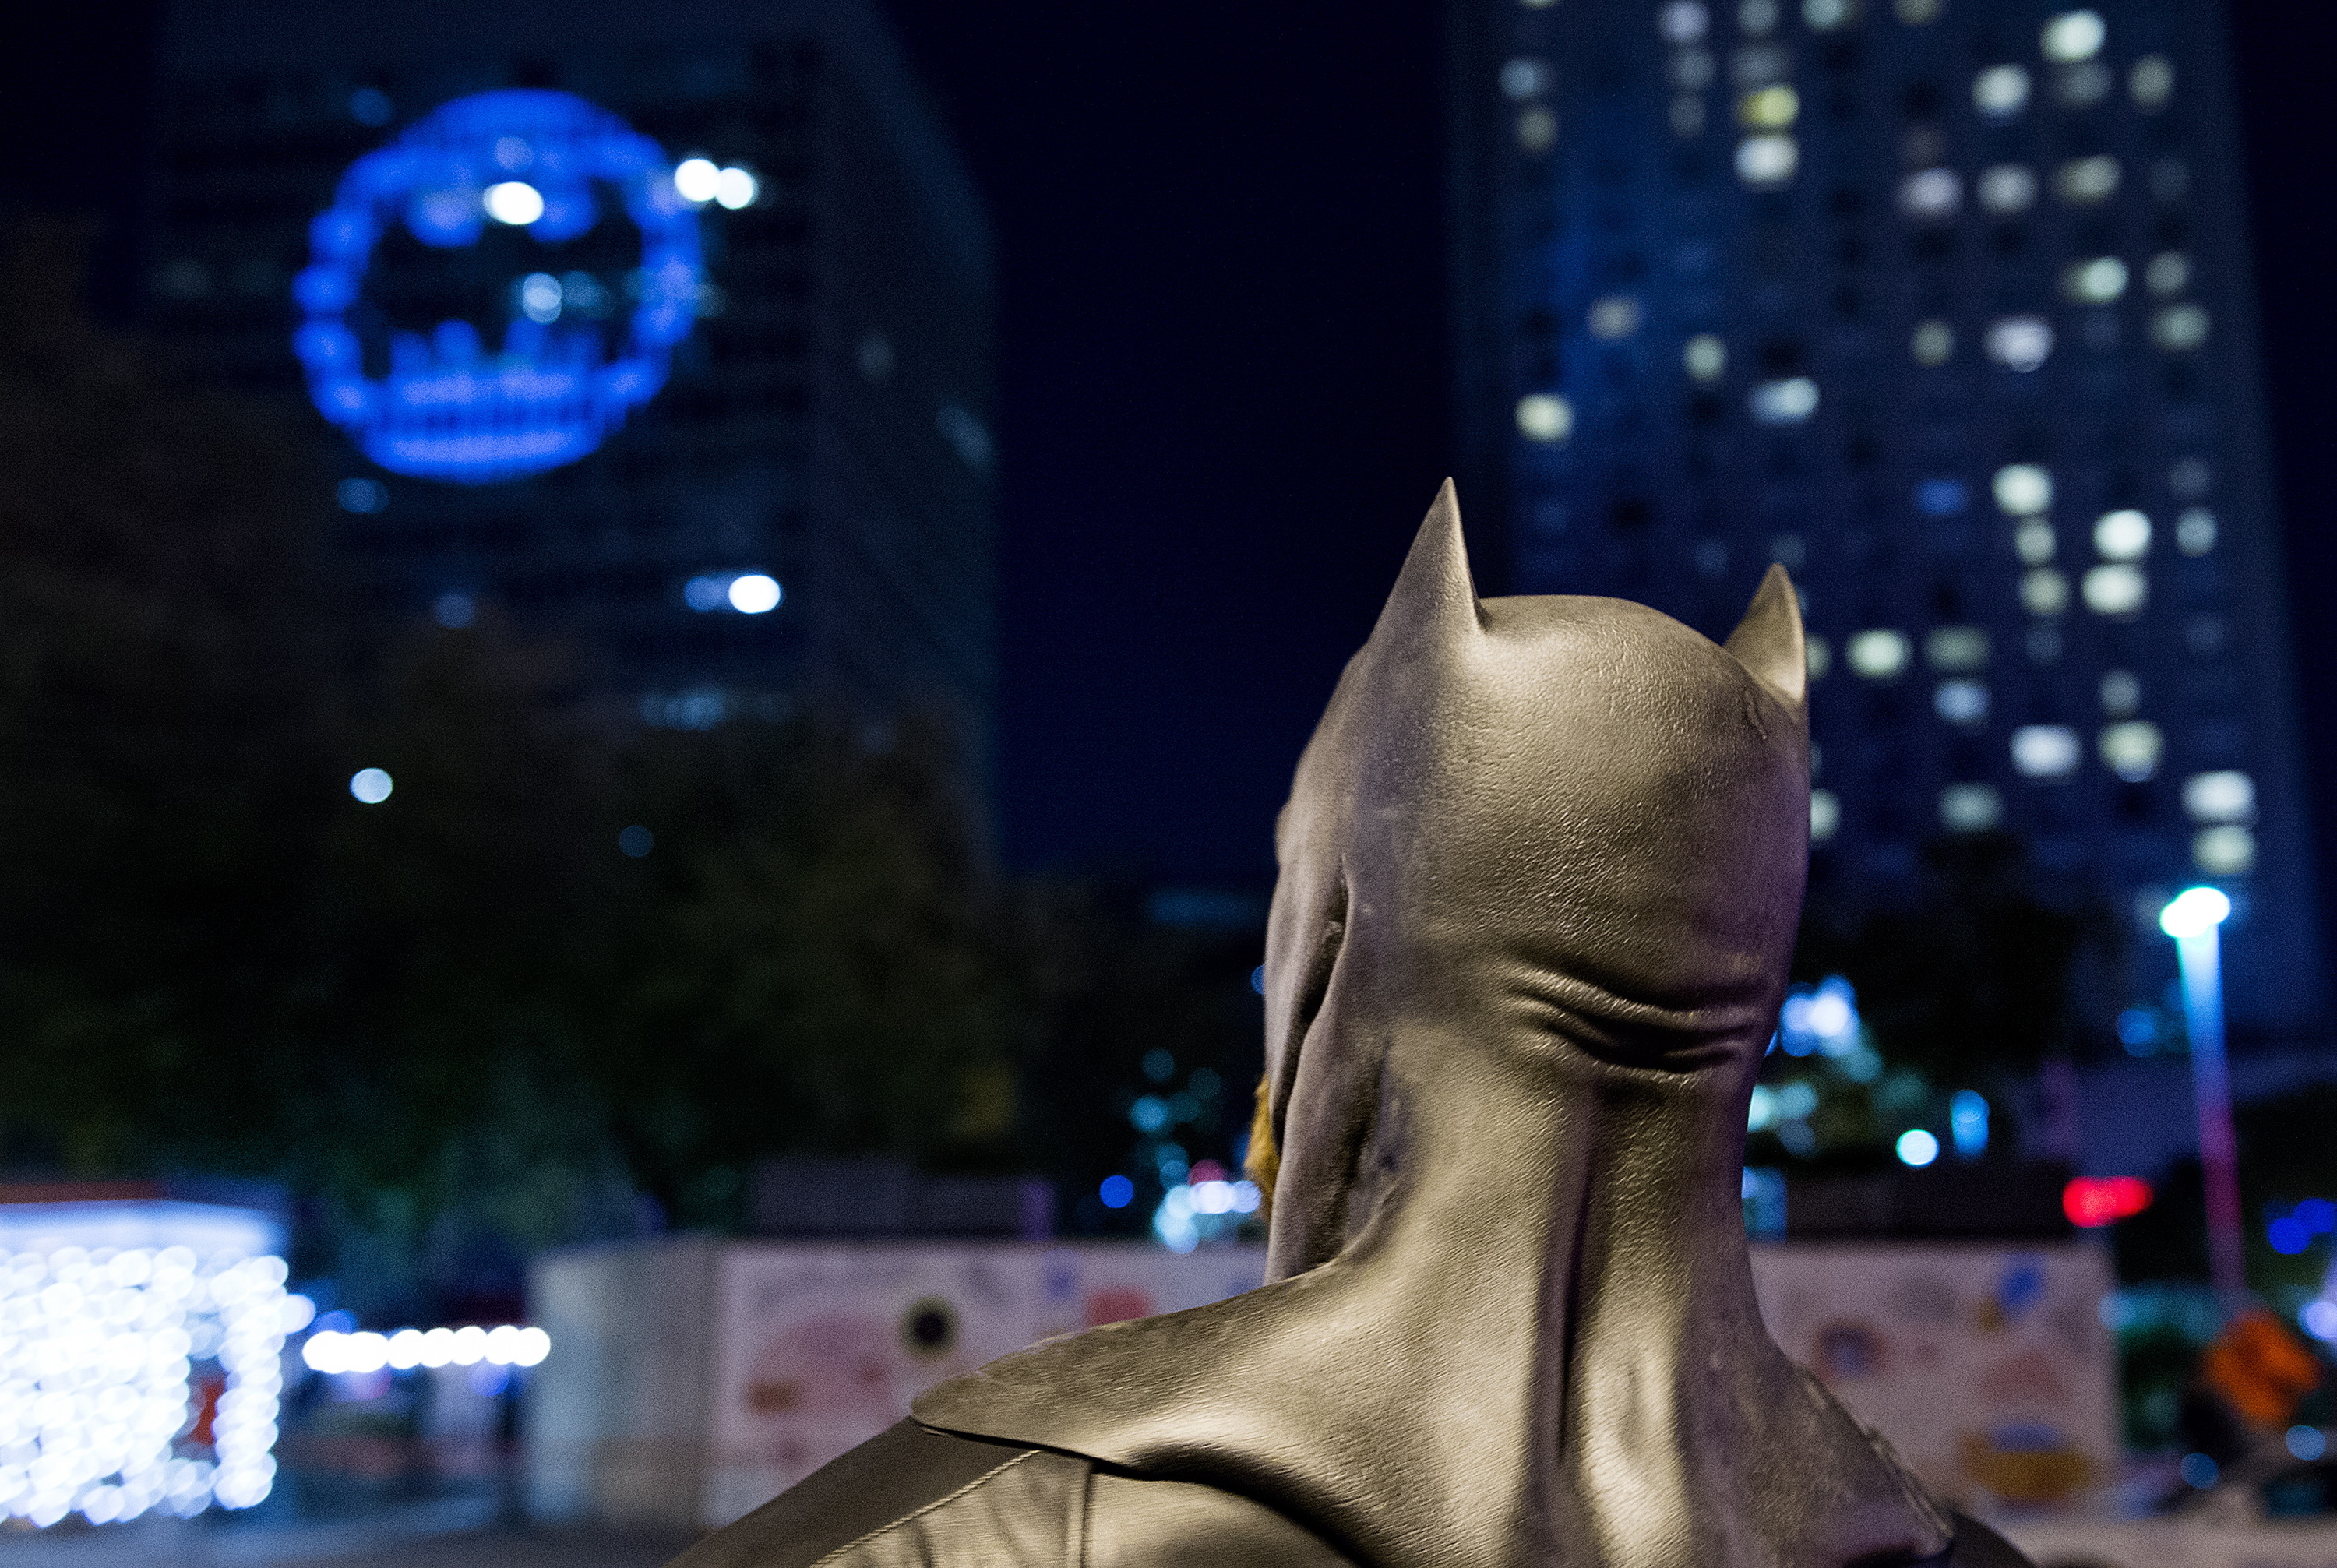 A man dressed as Batman looks up towards the Batman signal projected onto a building to celebrate Batman Day in Montreal, Saturday, Sept. 21, 2019. The night sky all over the world is lighting up Saturday with an illumination of the famed bat insignia to mark a special anniversary for Batman. DC Comics is carrying off a celebration of Batman Day to mark the 80th anniversary of the appearance of crimefighter Bruce Wayne and his masked hidden identity. (Graham Hughes/The Canadian Press via AP)